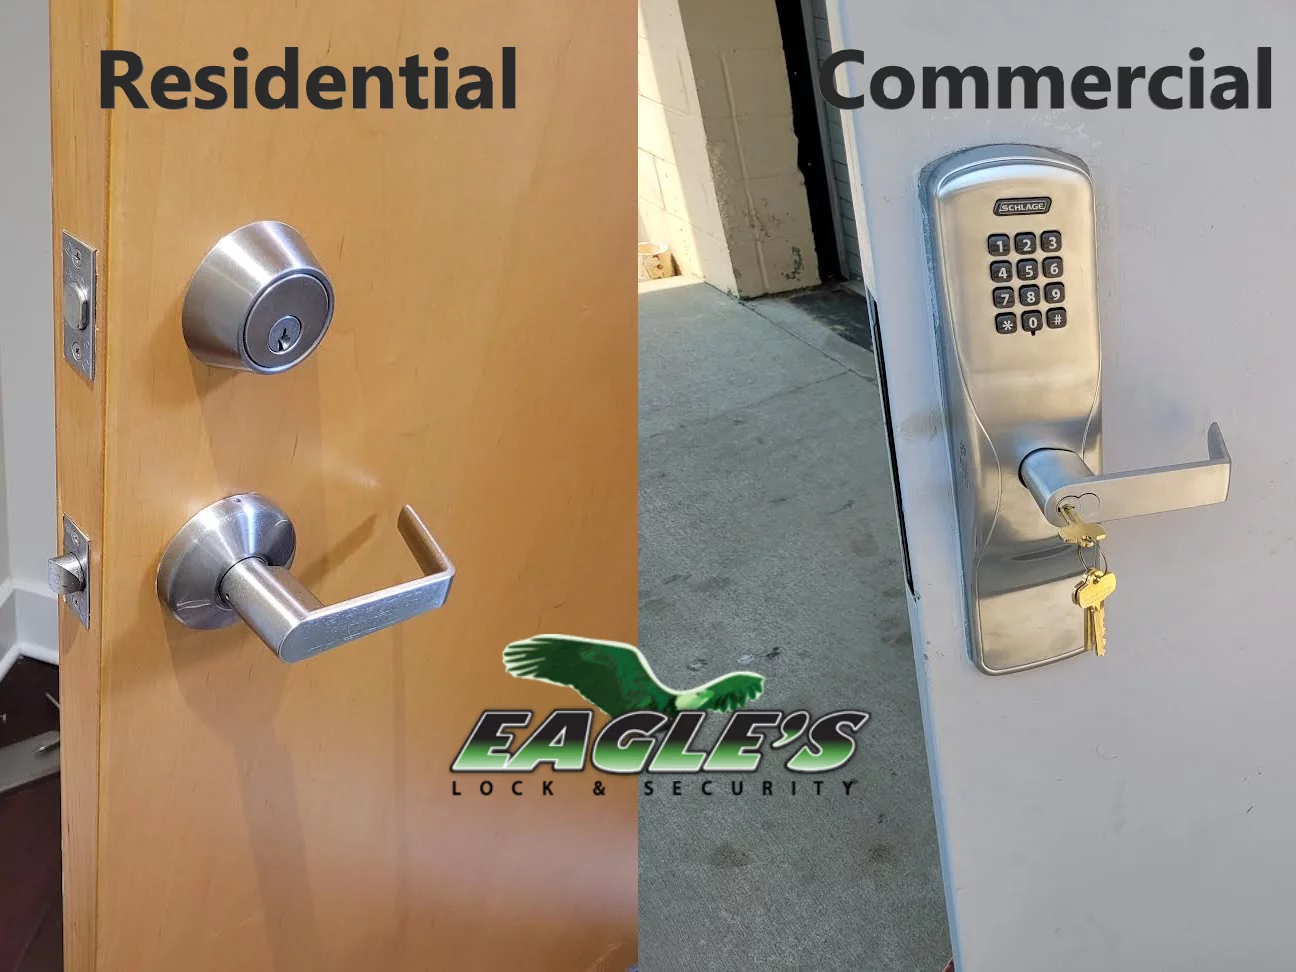 Home and Business Emergency Lock Repair Services Near Me